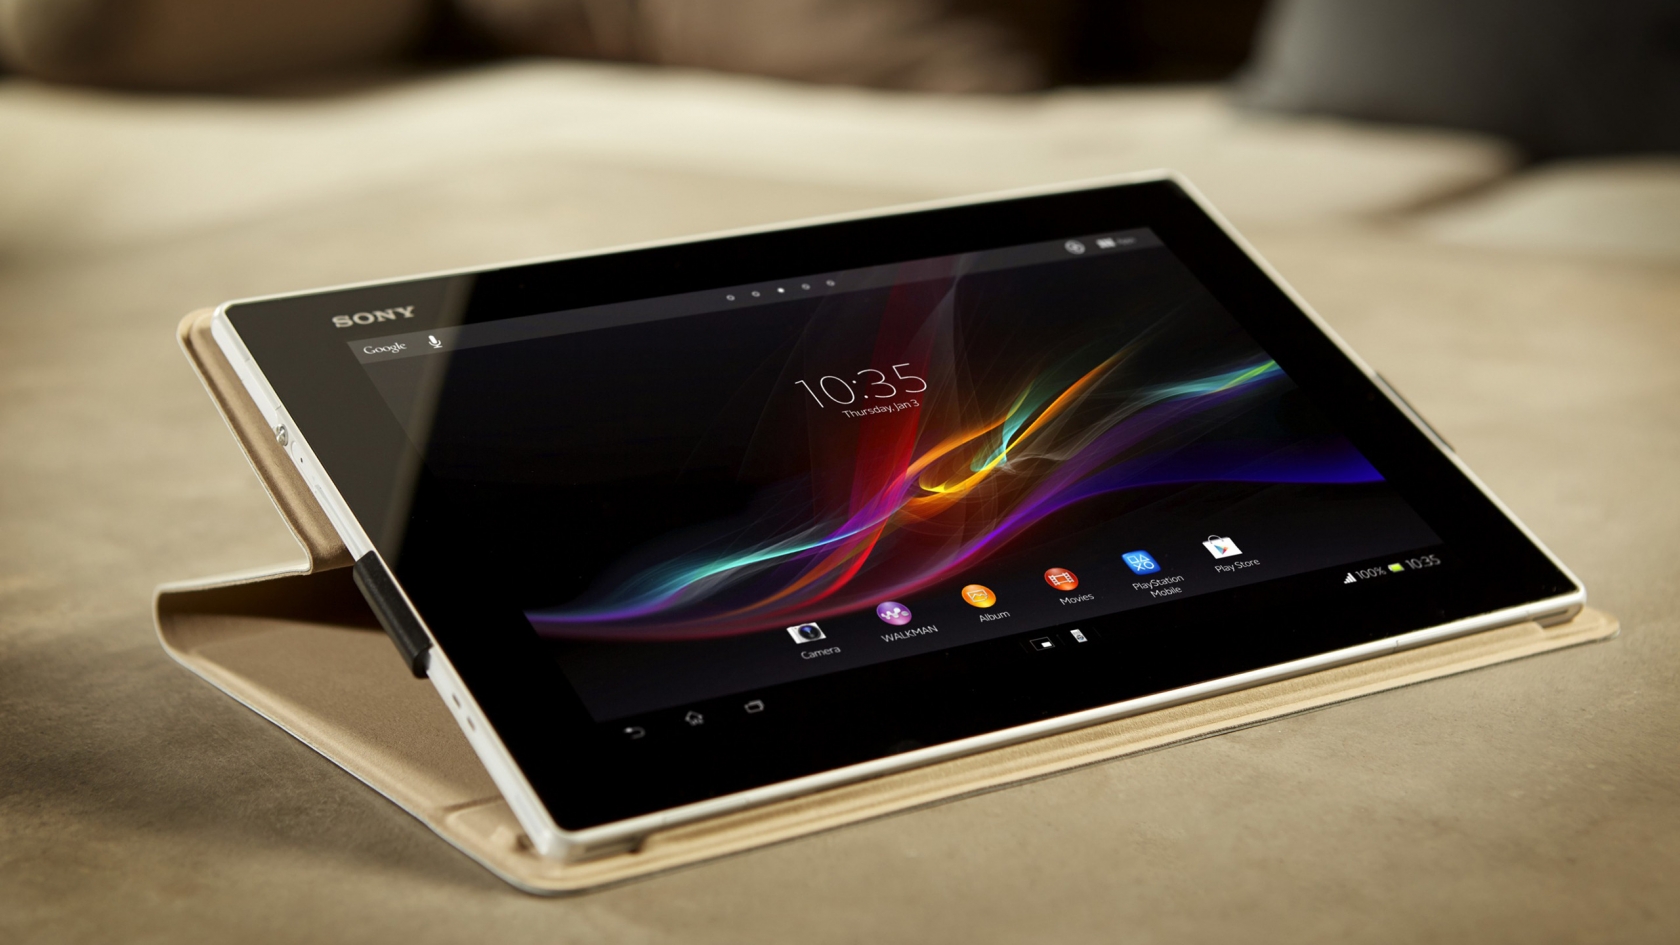 Sony Xperia Tablet Z for 1680 x 945 HDTV resolution